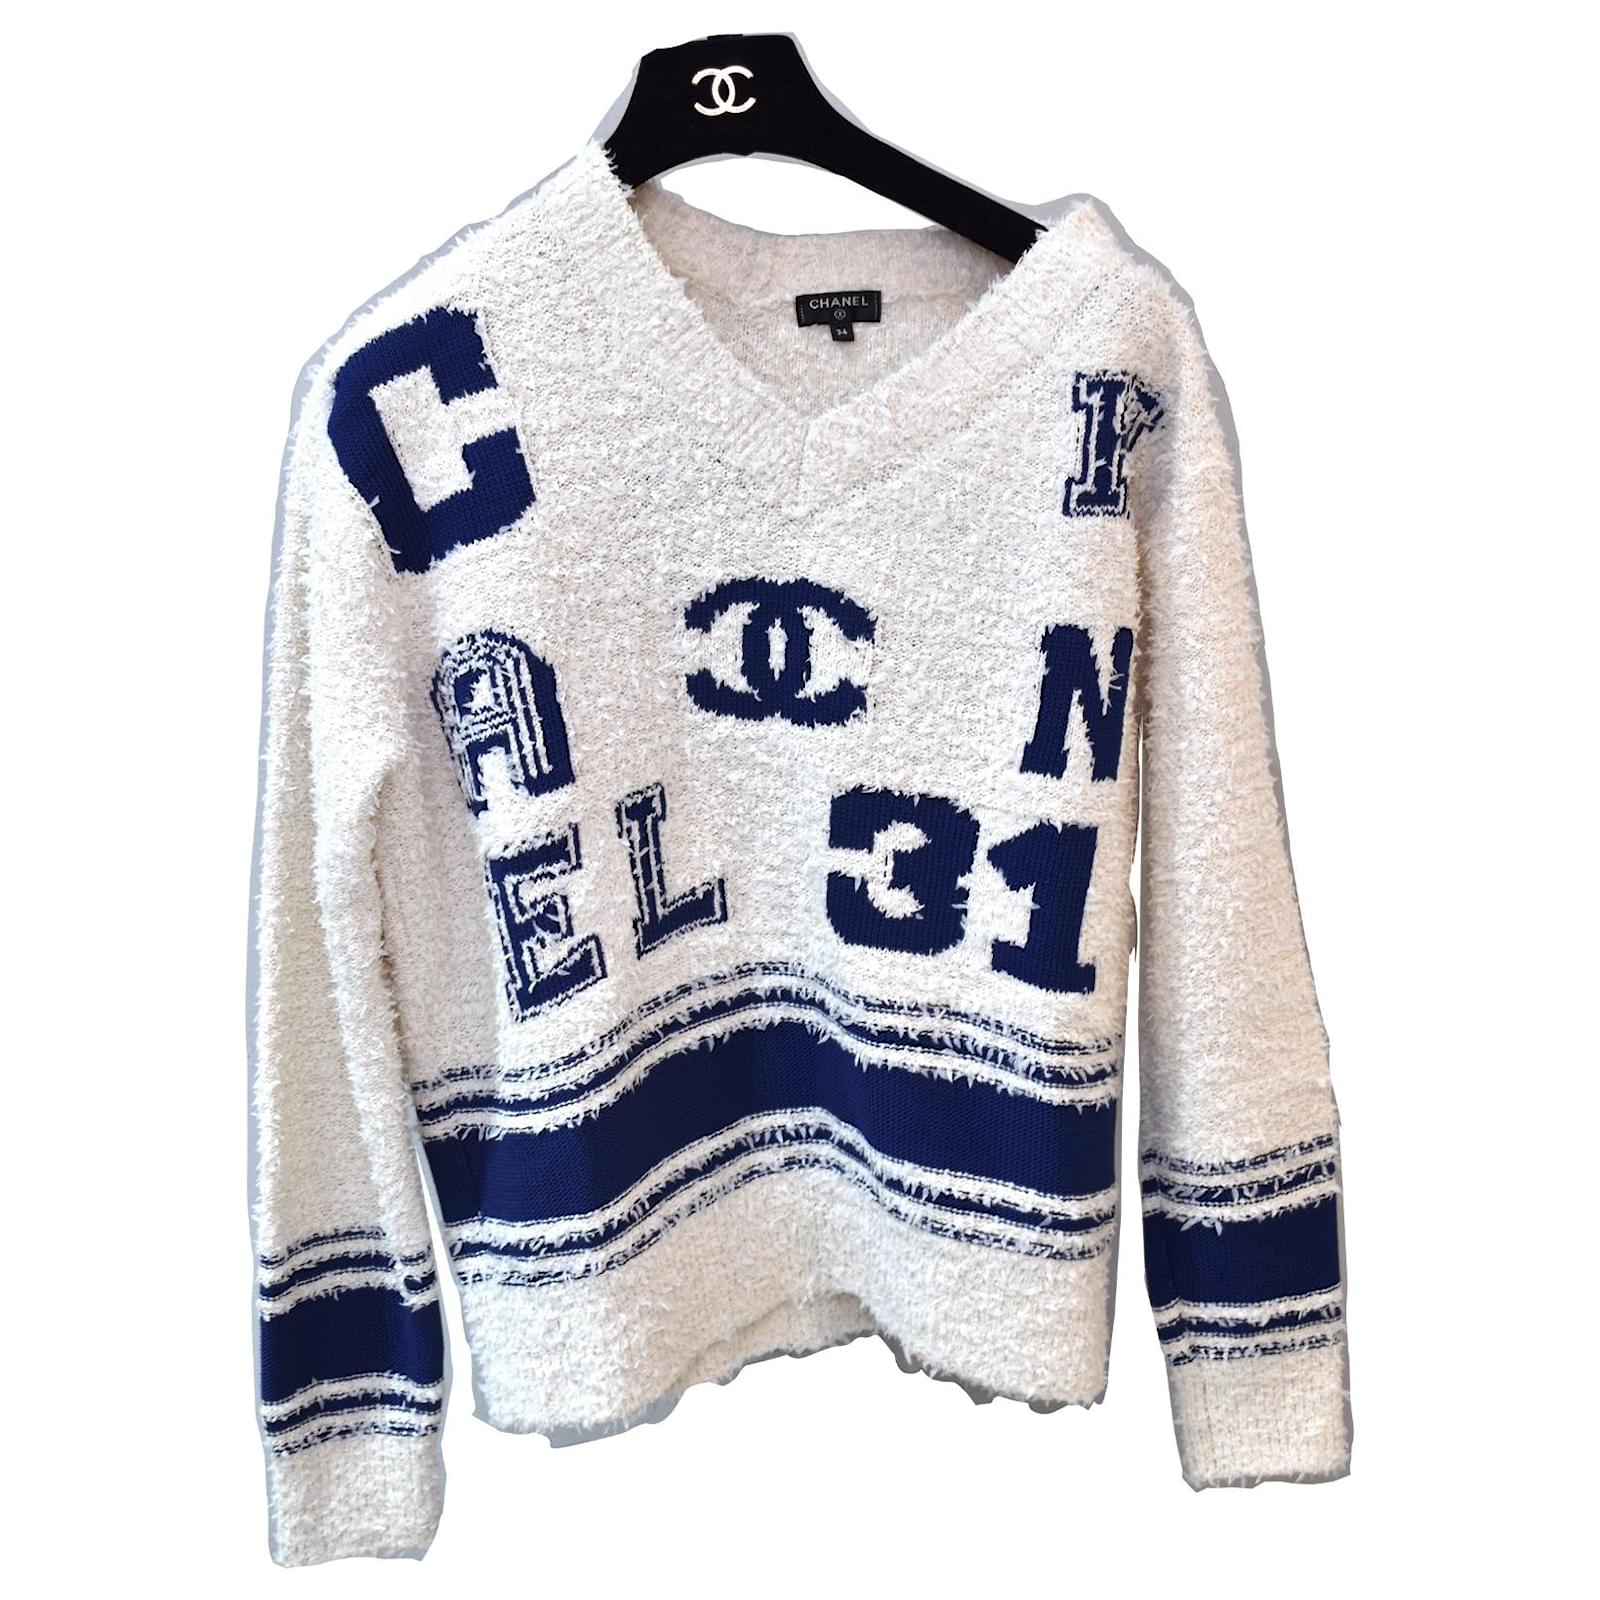 Knitwear Chanel Iconic Varsity Boucle Logo Pullover Sweater Size 34 FR